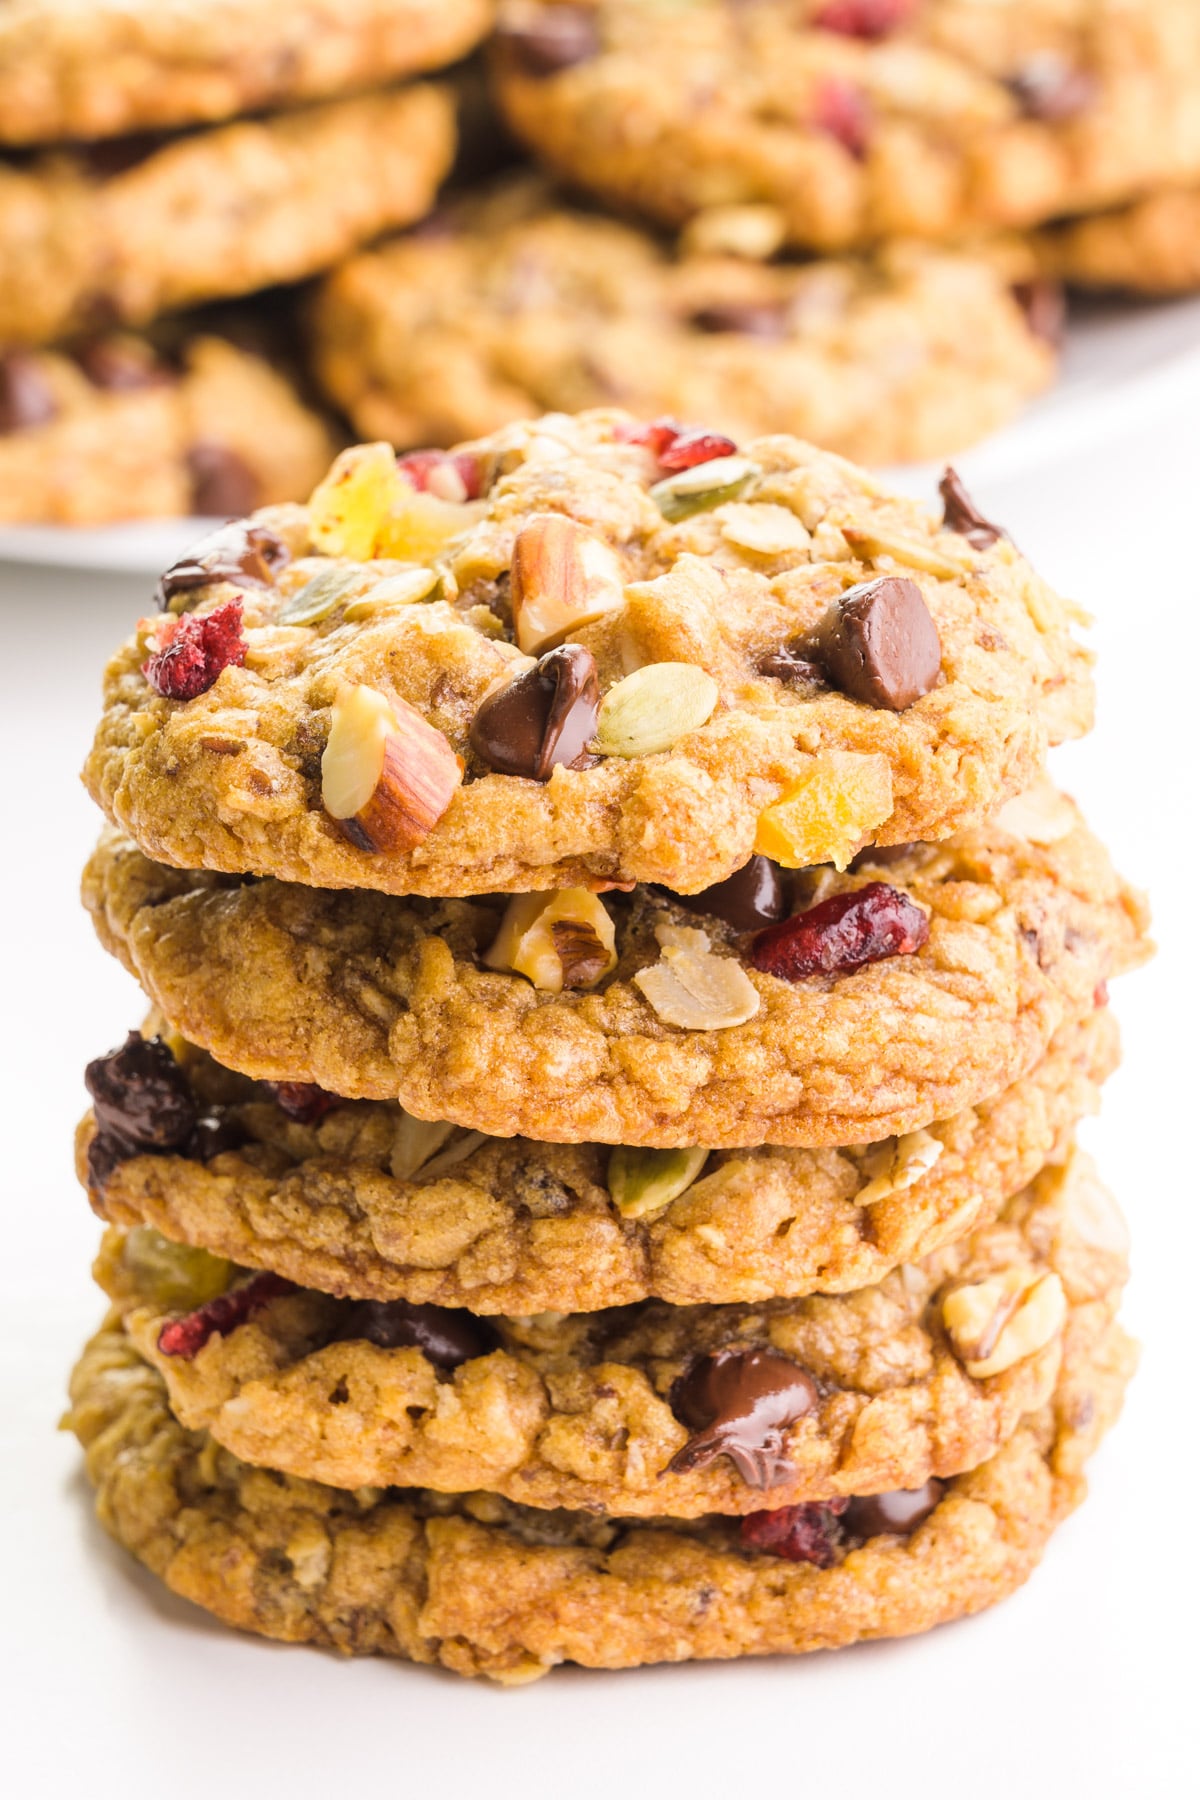 A stack of cookies sits in front of a plate of more cookies.